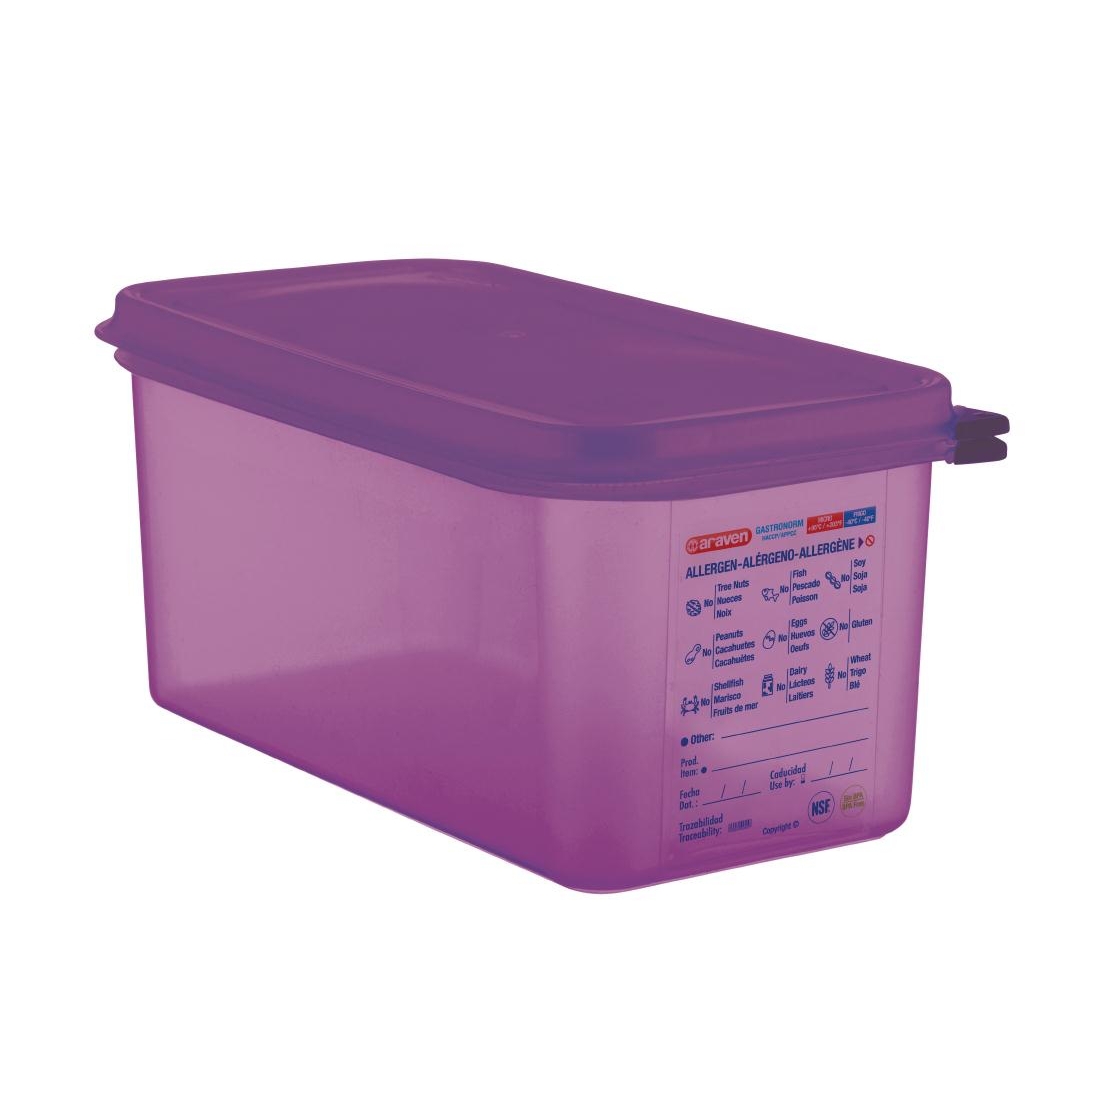 Araven 1/3 GN Polypropylene Gastronorm Food Container 6L